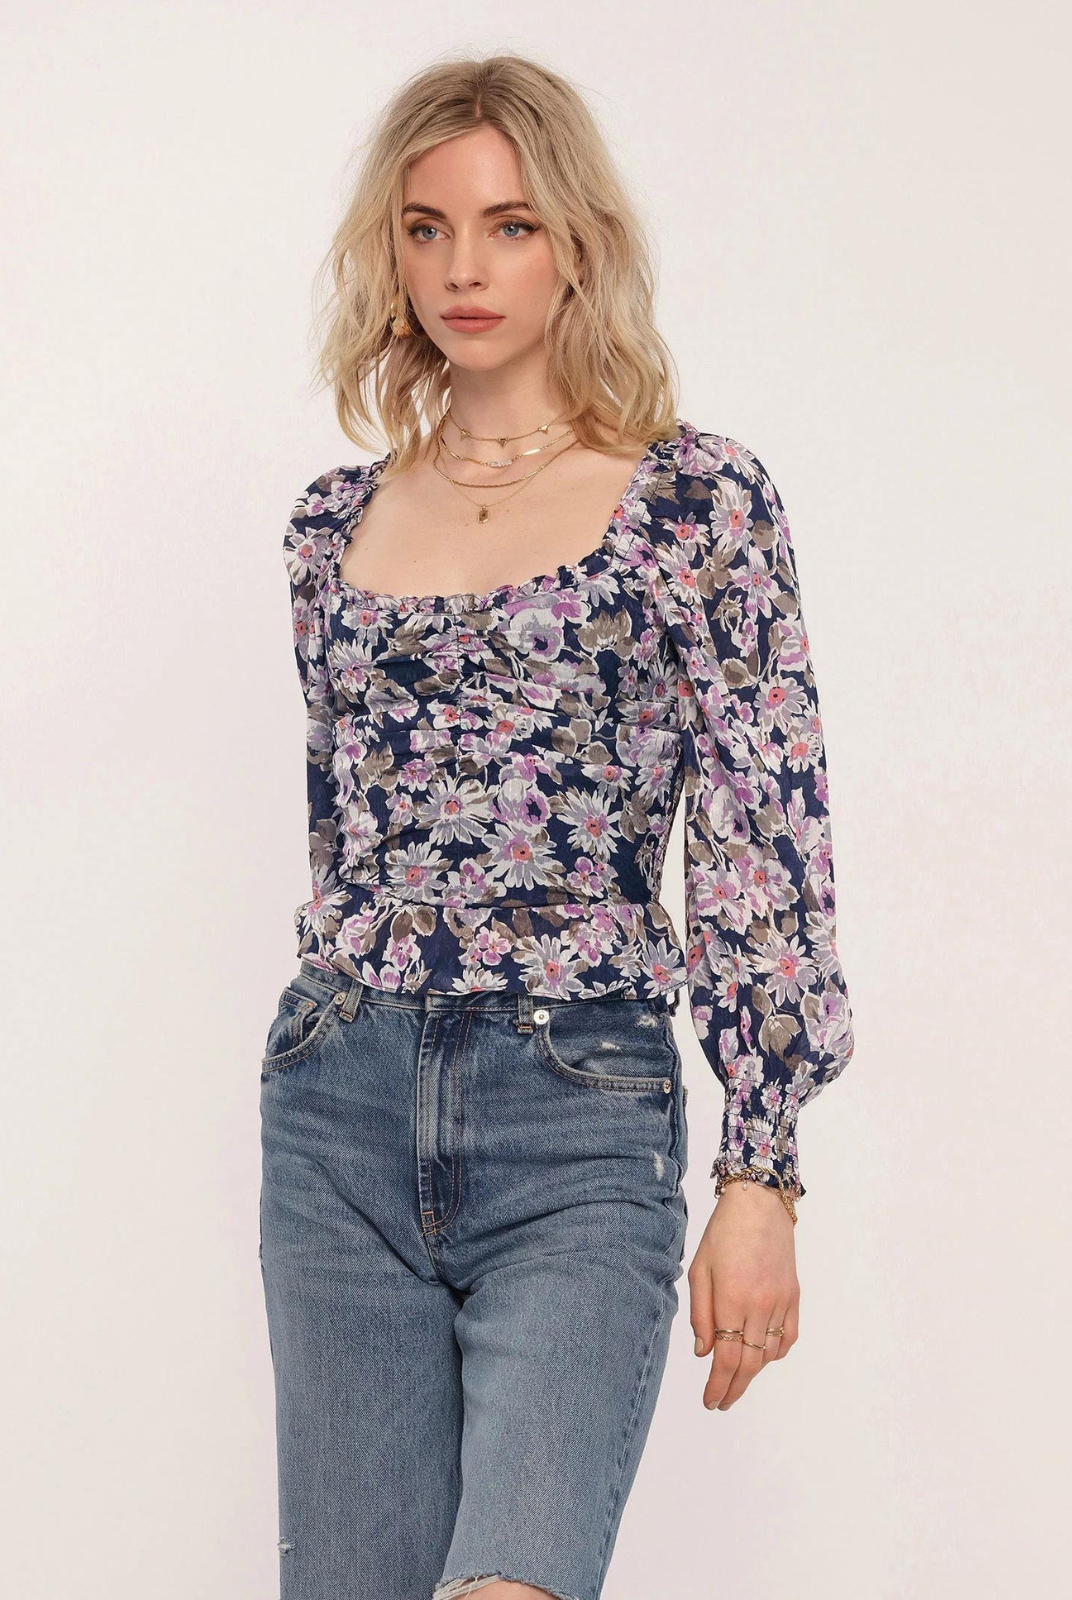 Heartloom Ariana Top. Our Ariana Top is effortlessly feminine. It has a softly ruched bodice and sweetheart neckline. The blouson sleeves and romantic floral print are perfect for date night.